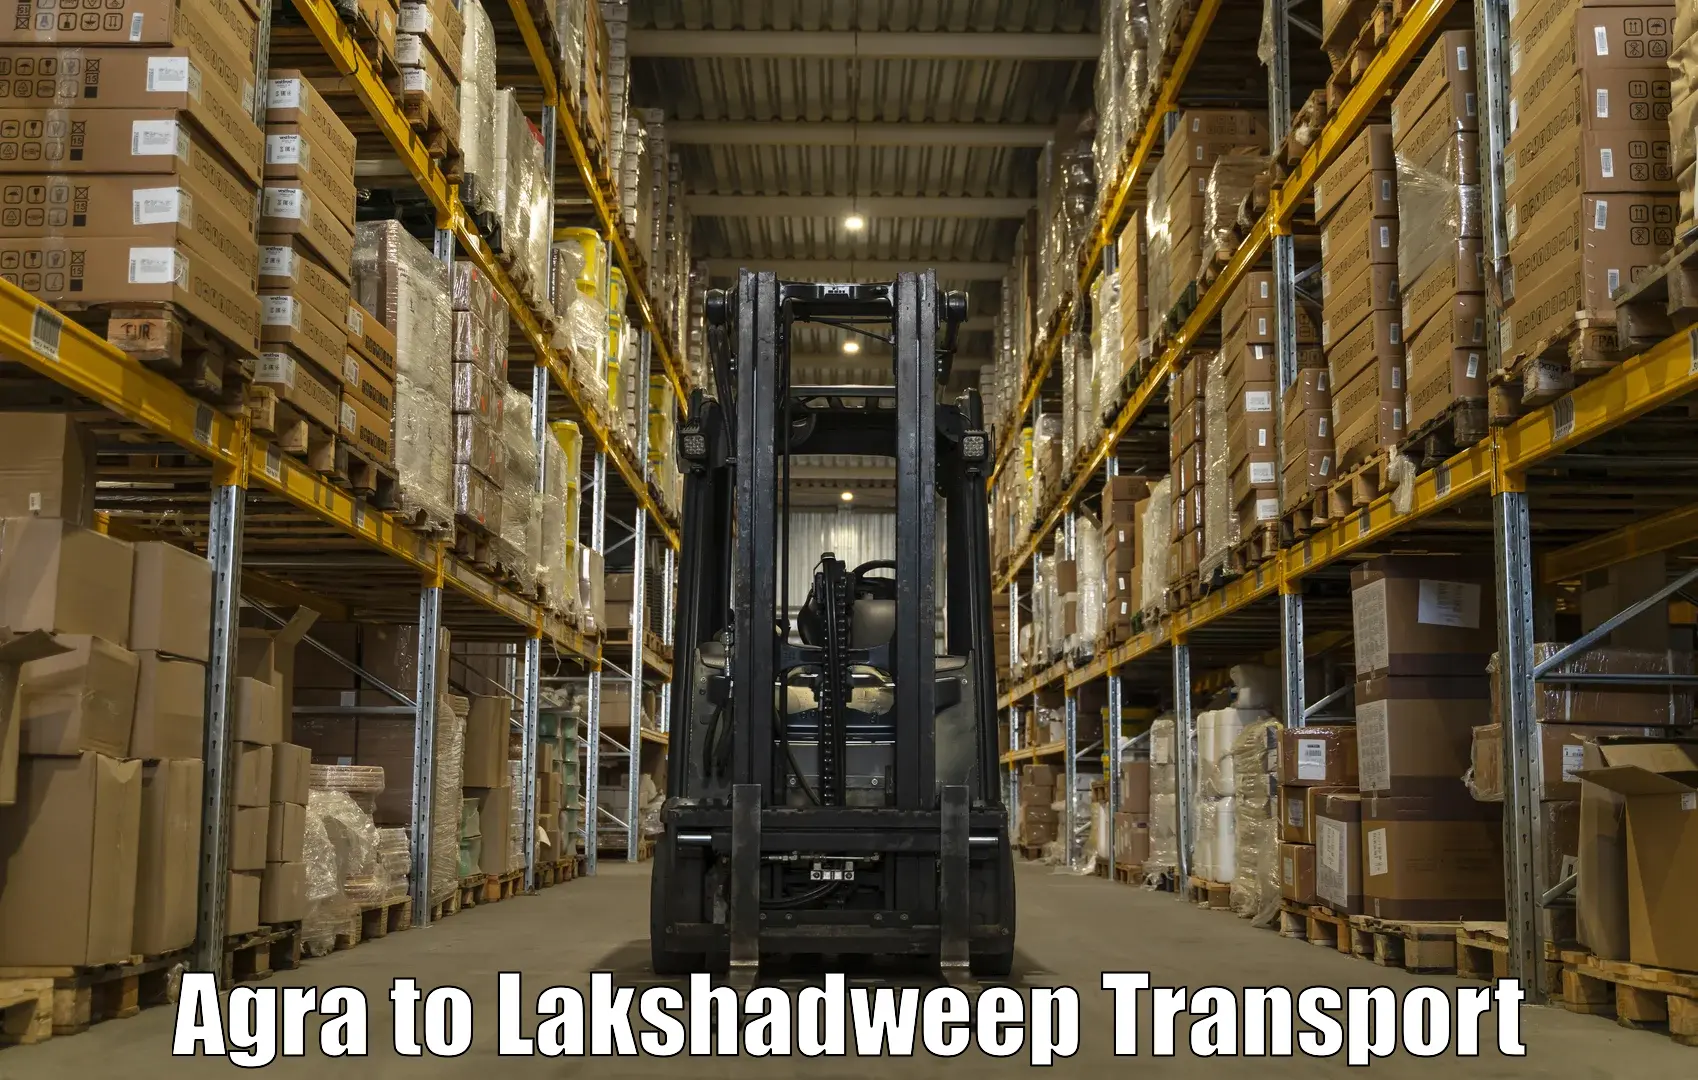 Delivery service Agra to Lakshadweep